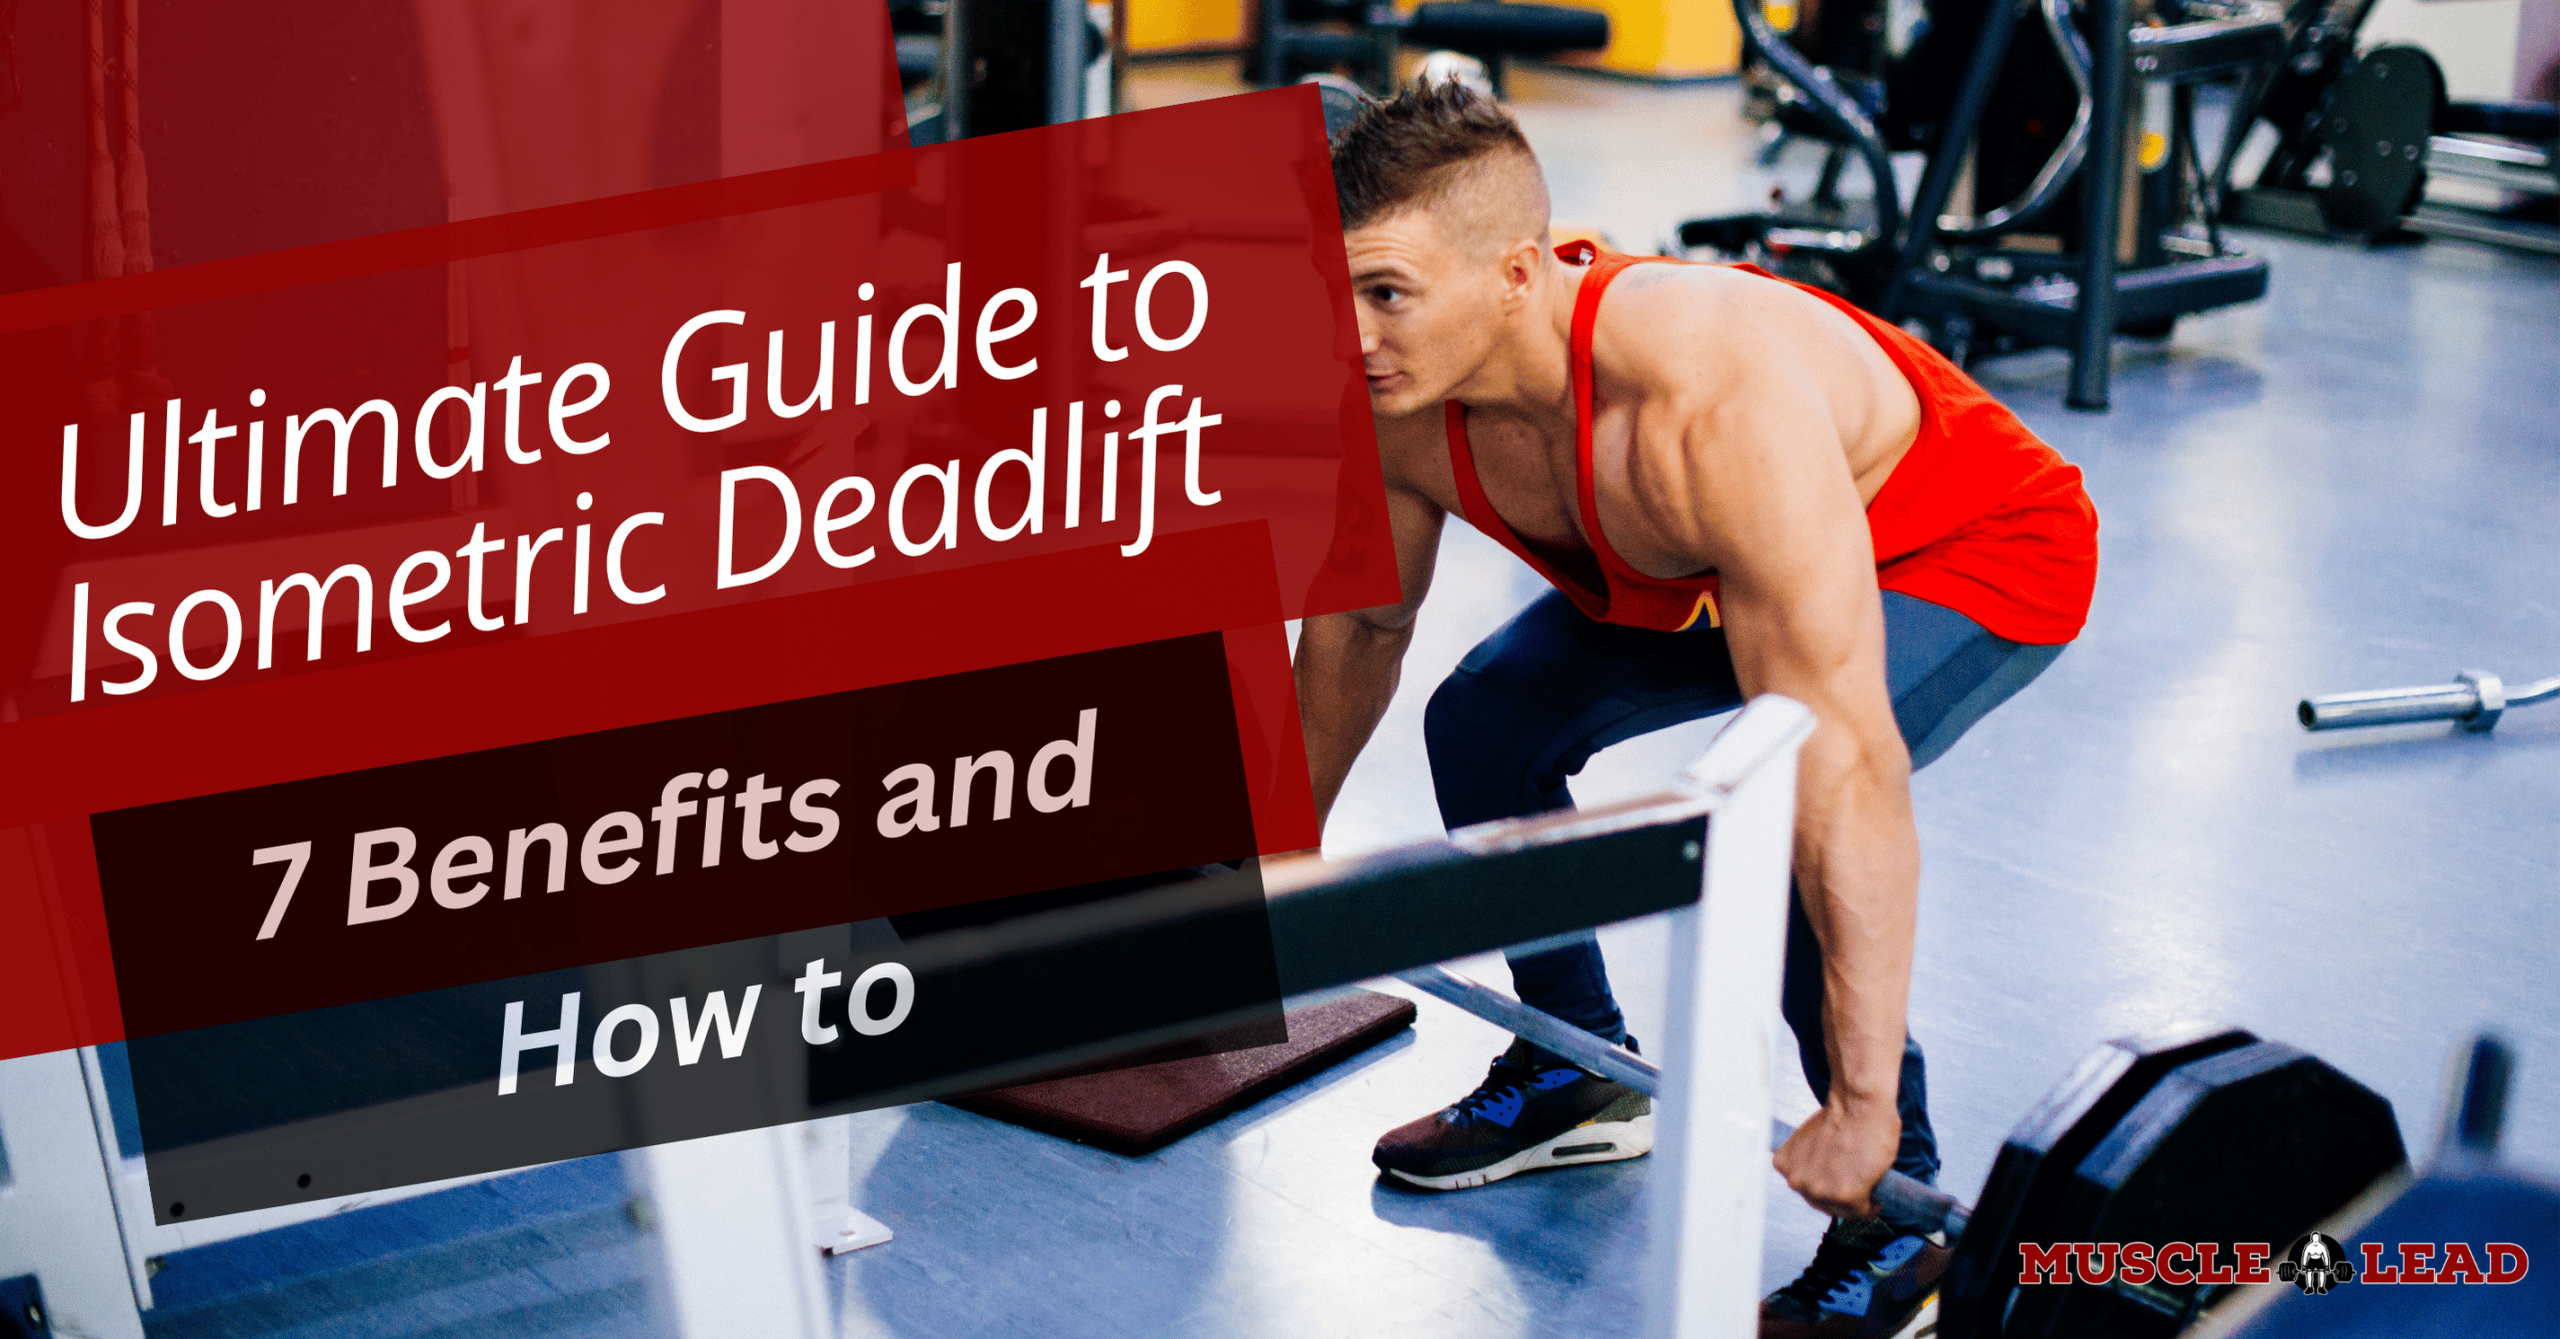 Ultimate Guide to Isometric Deadlift:  7 Benefits and How to